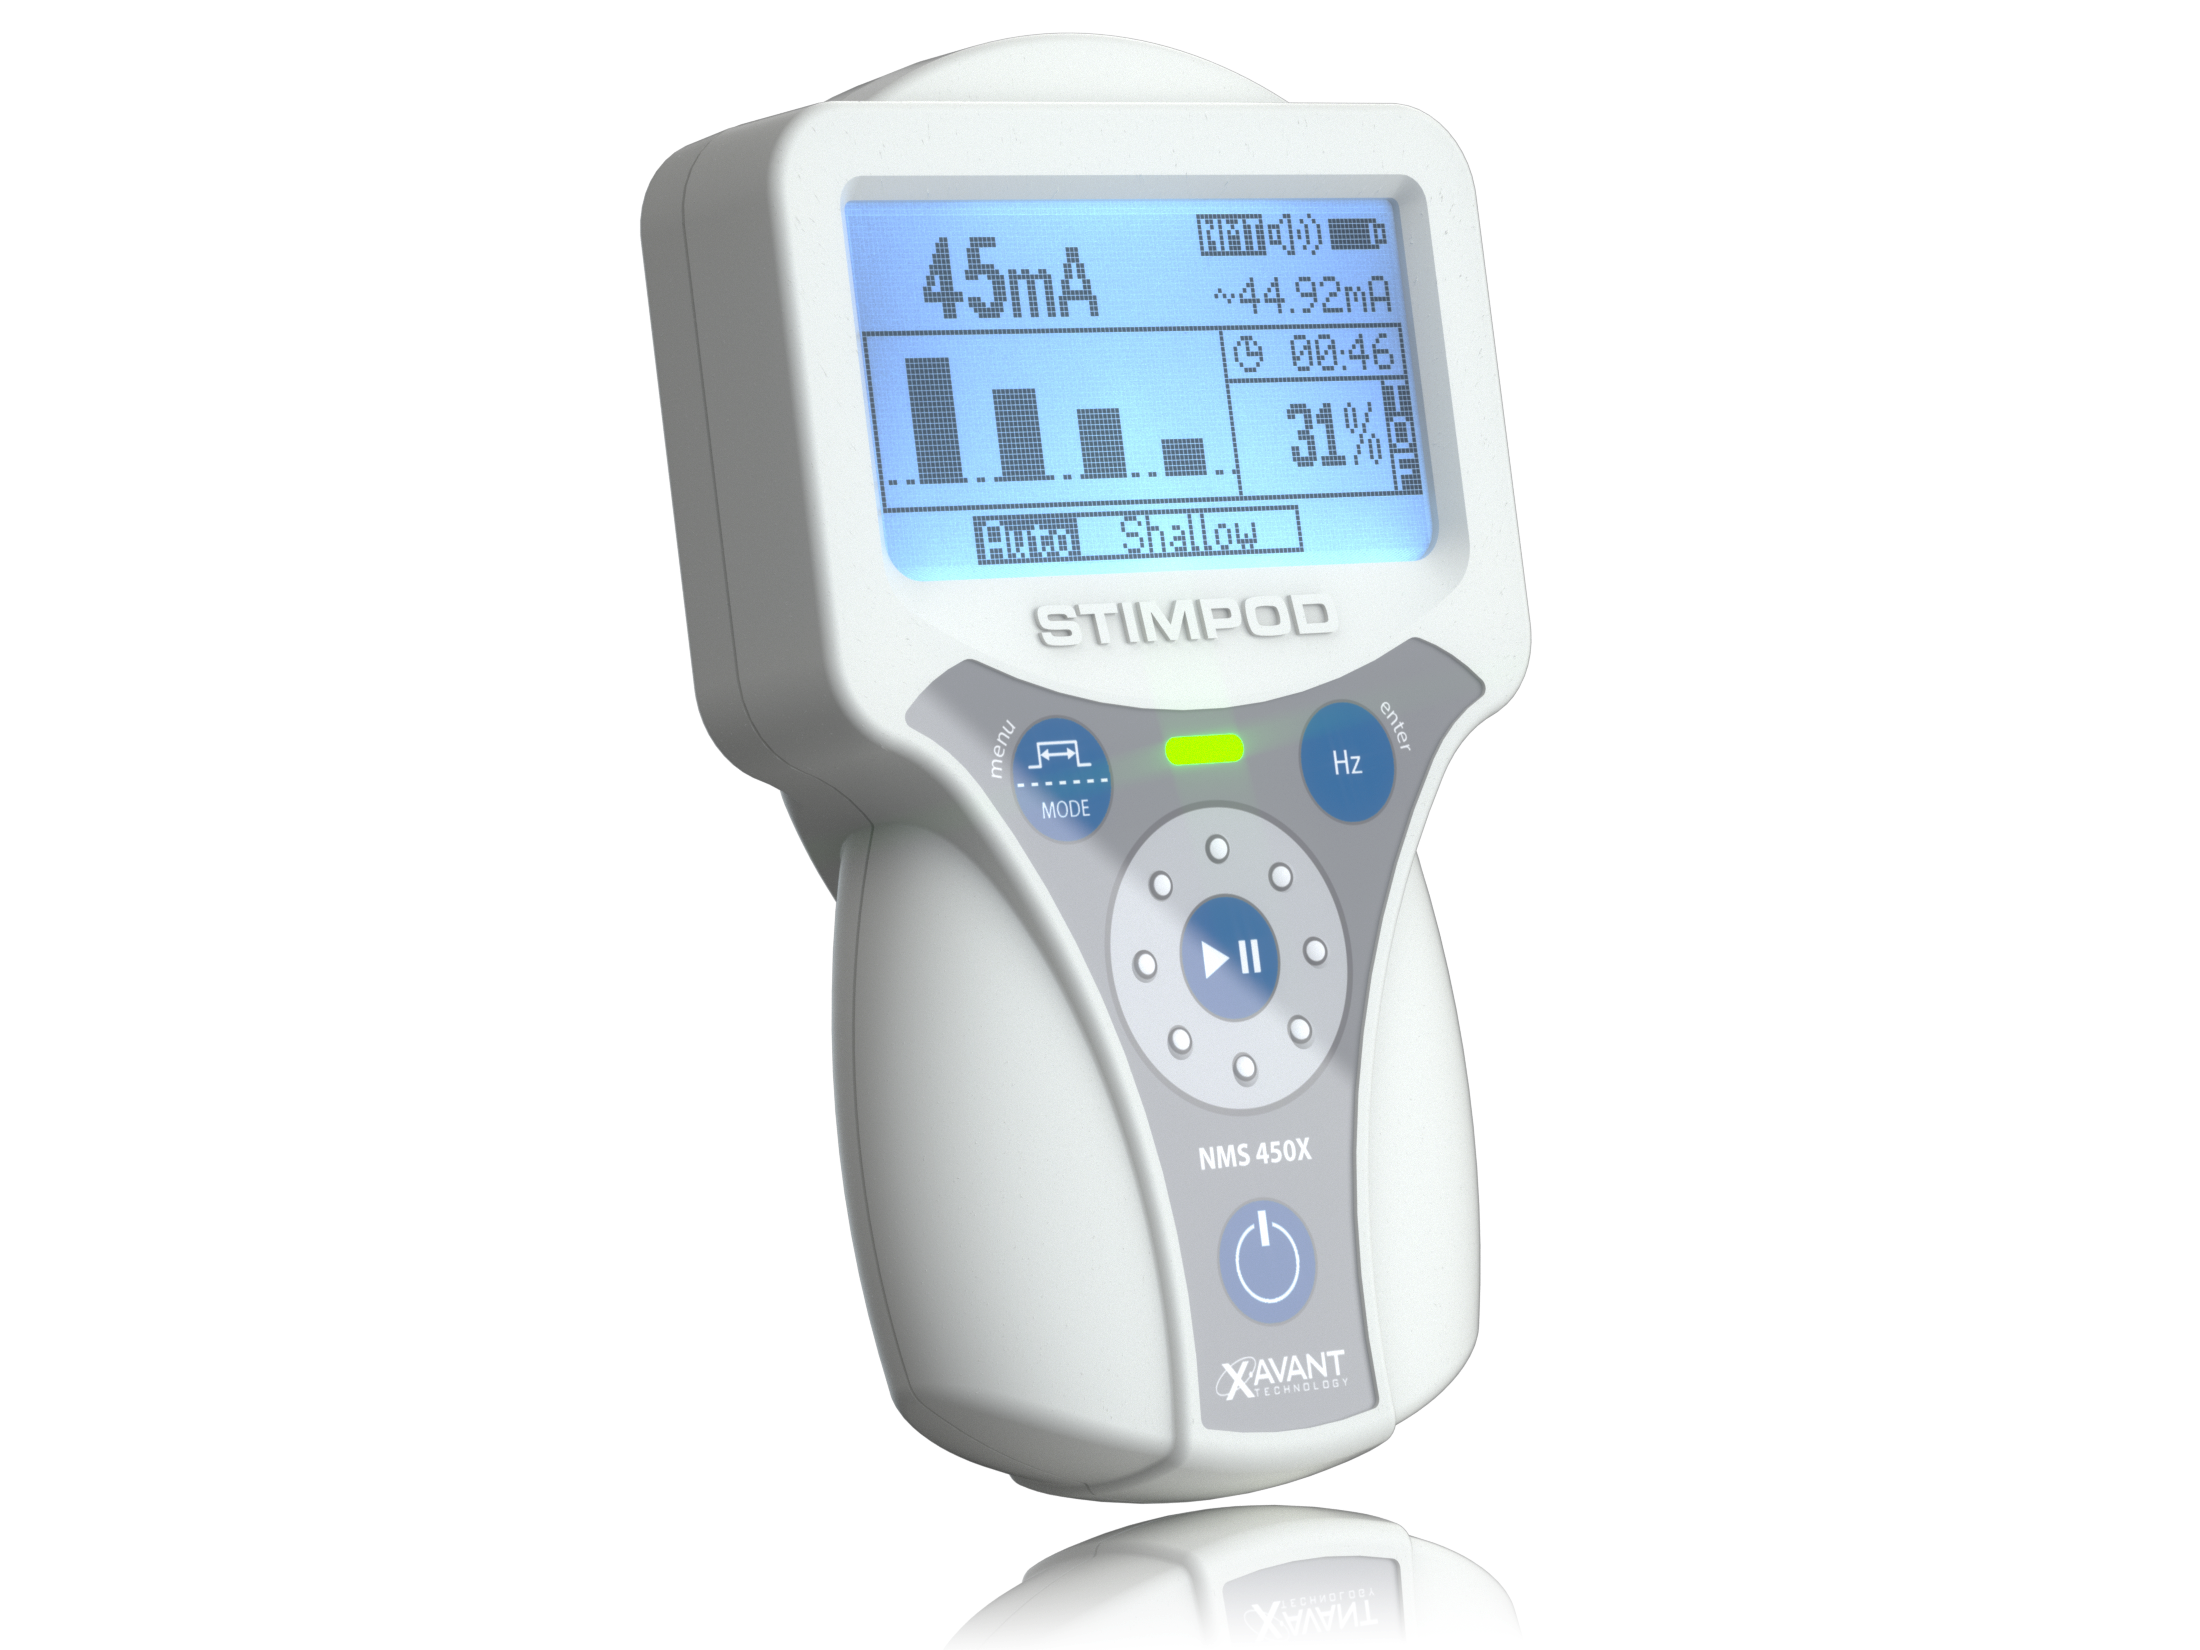 Peripheral Nerve Stimulator - Train of Four Monitoring: Overview